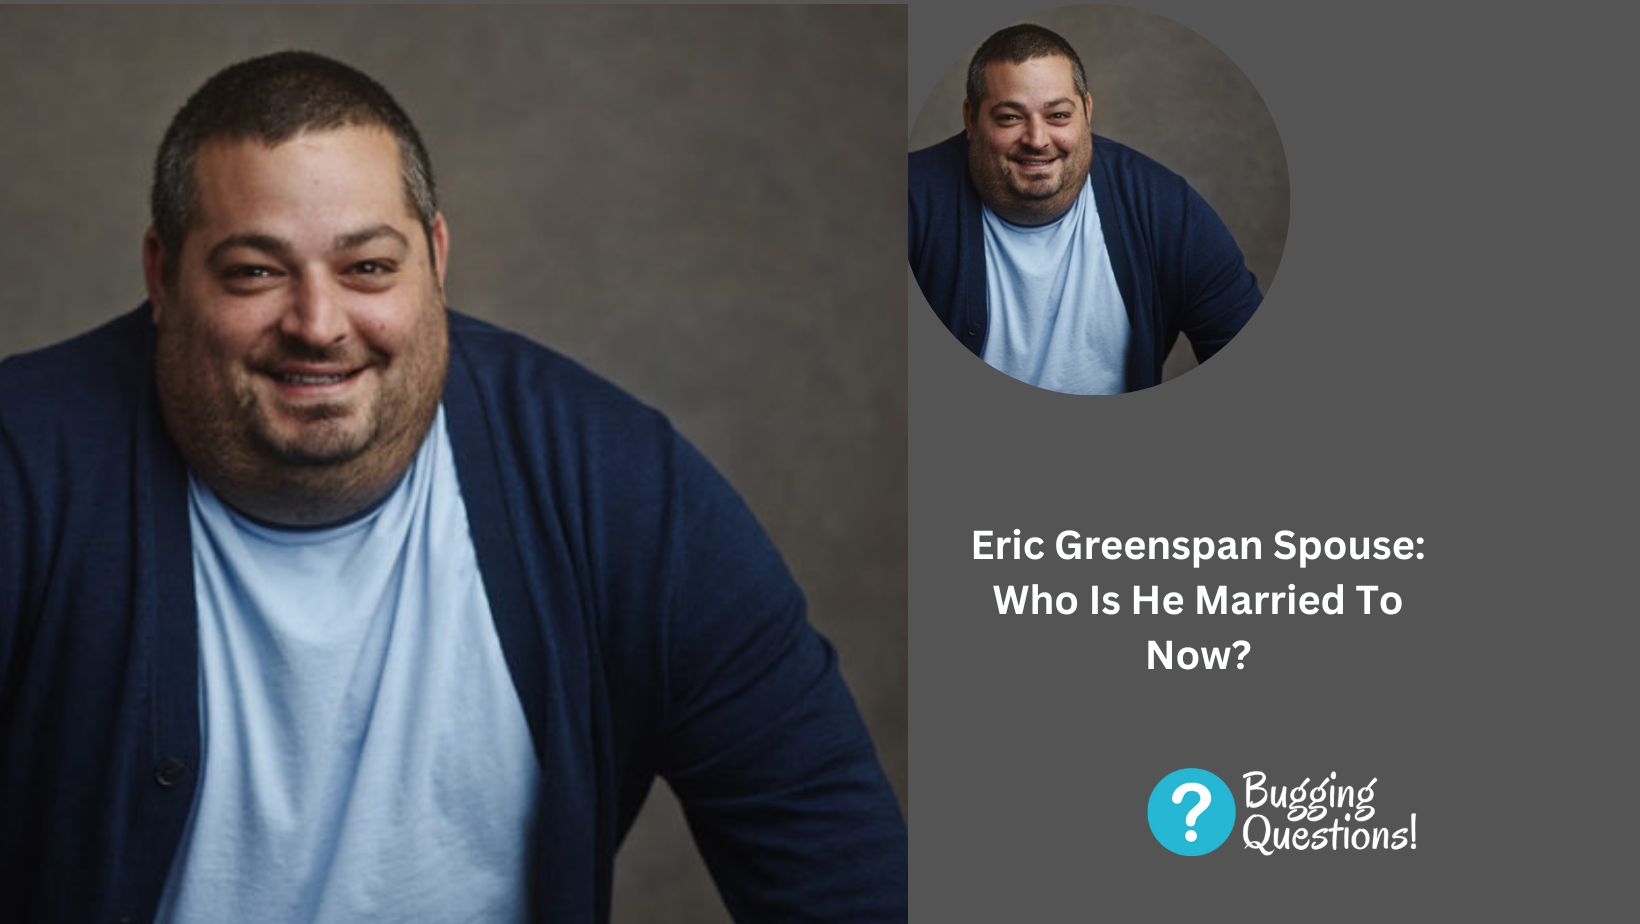 Eric Greenspan Spouse: Who Is He Married To Now?